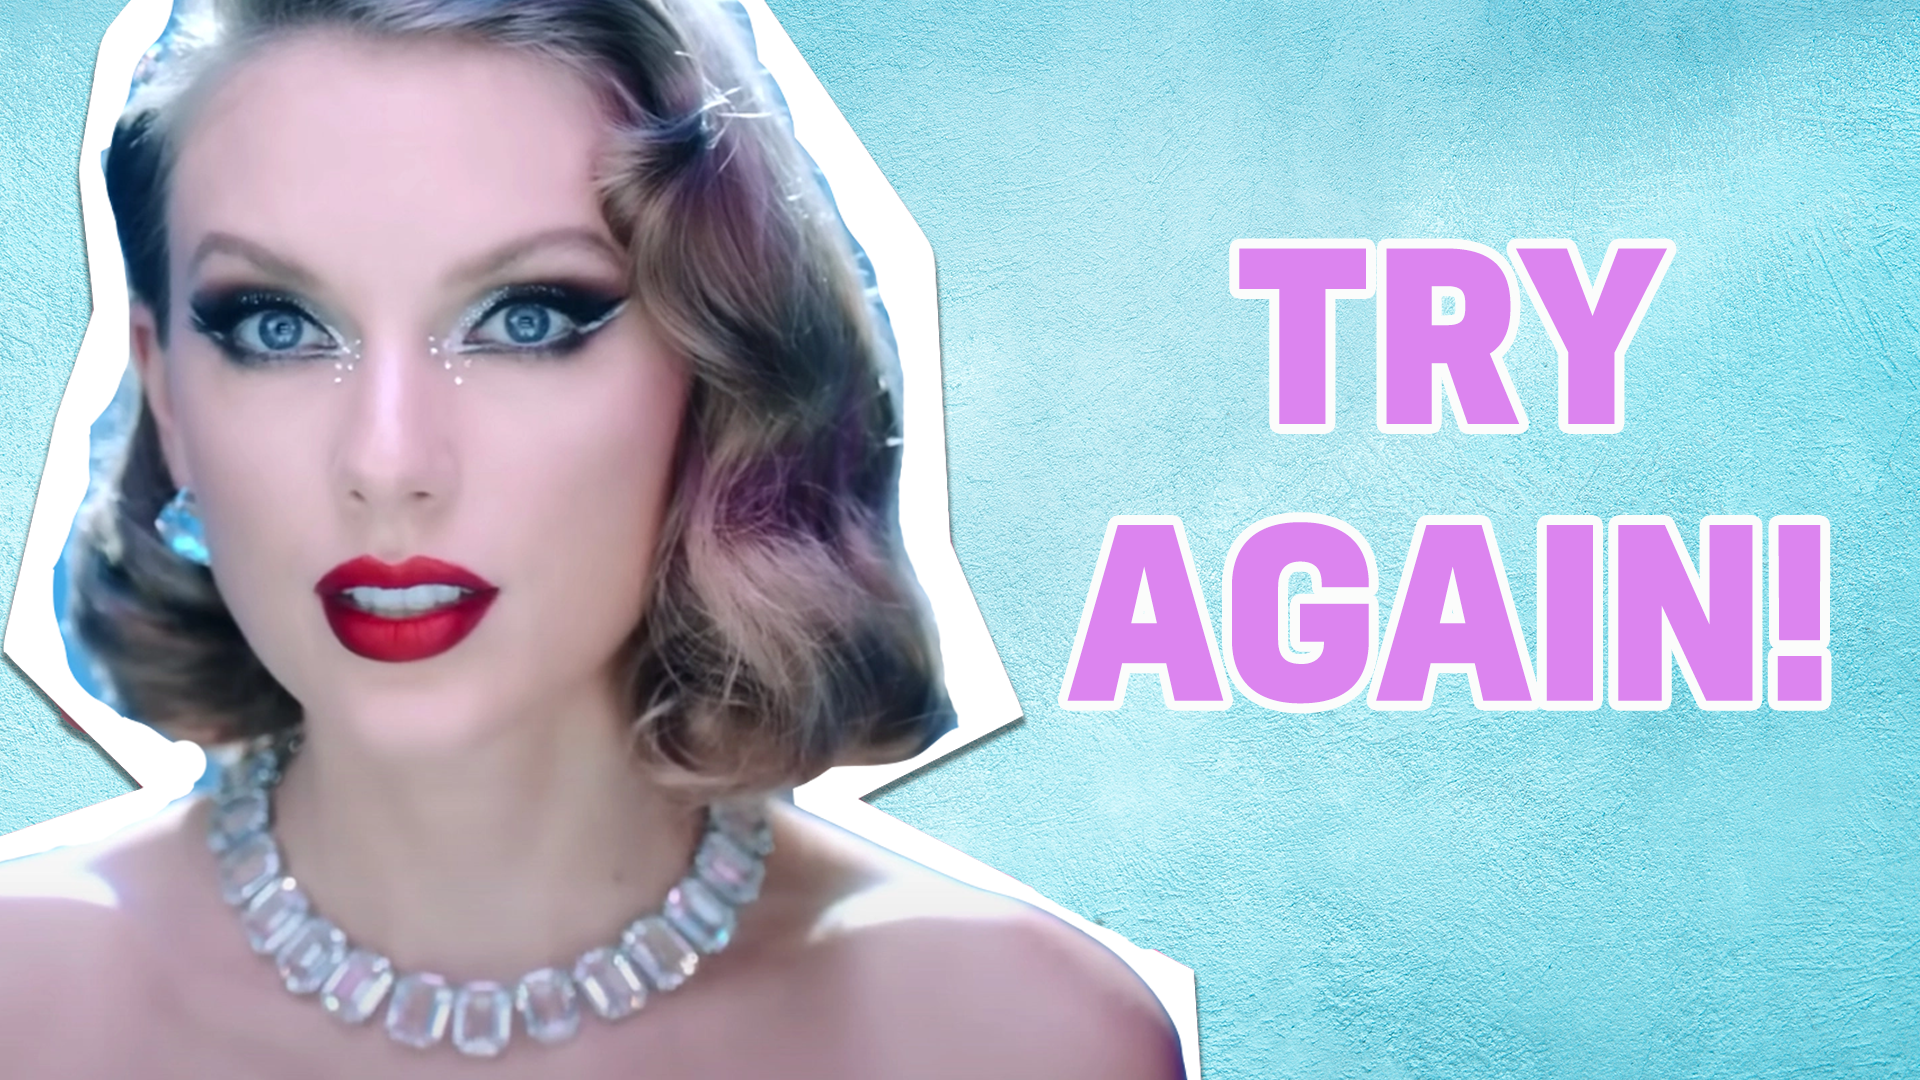 I knew you were trouble when you started this quiz! But don't worry, try again and see if you can score higher!